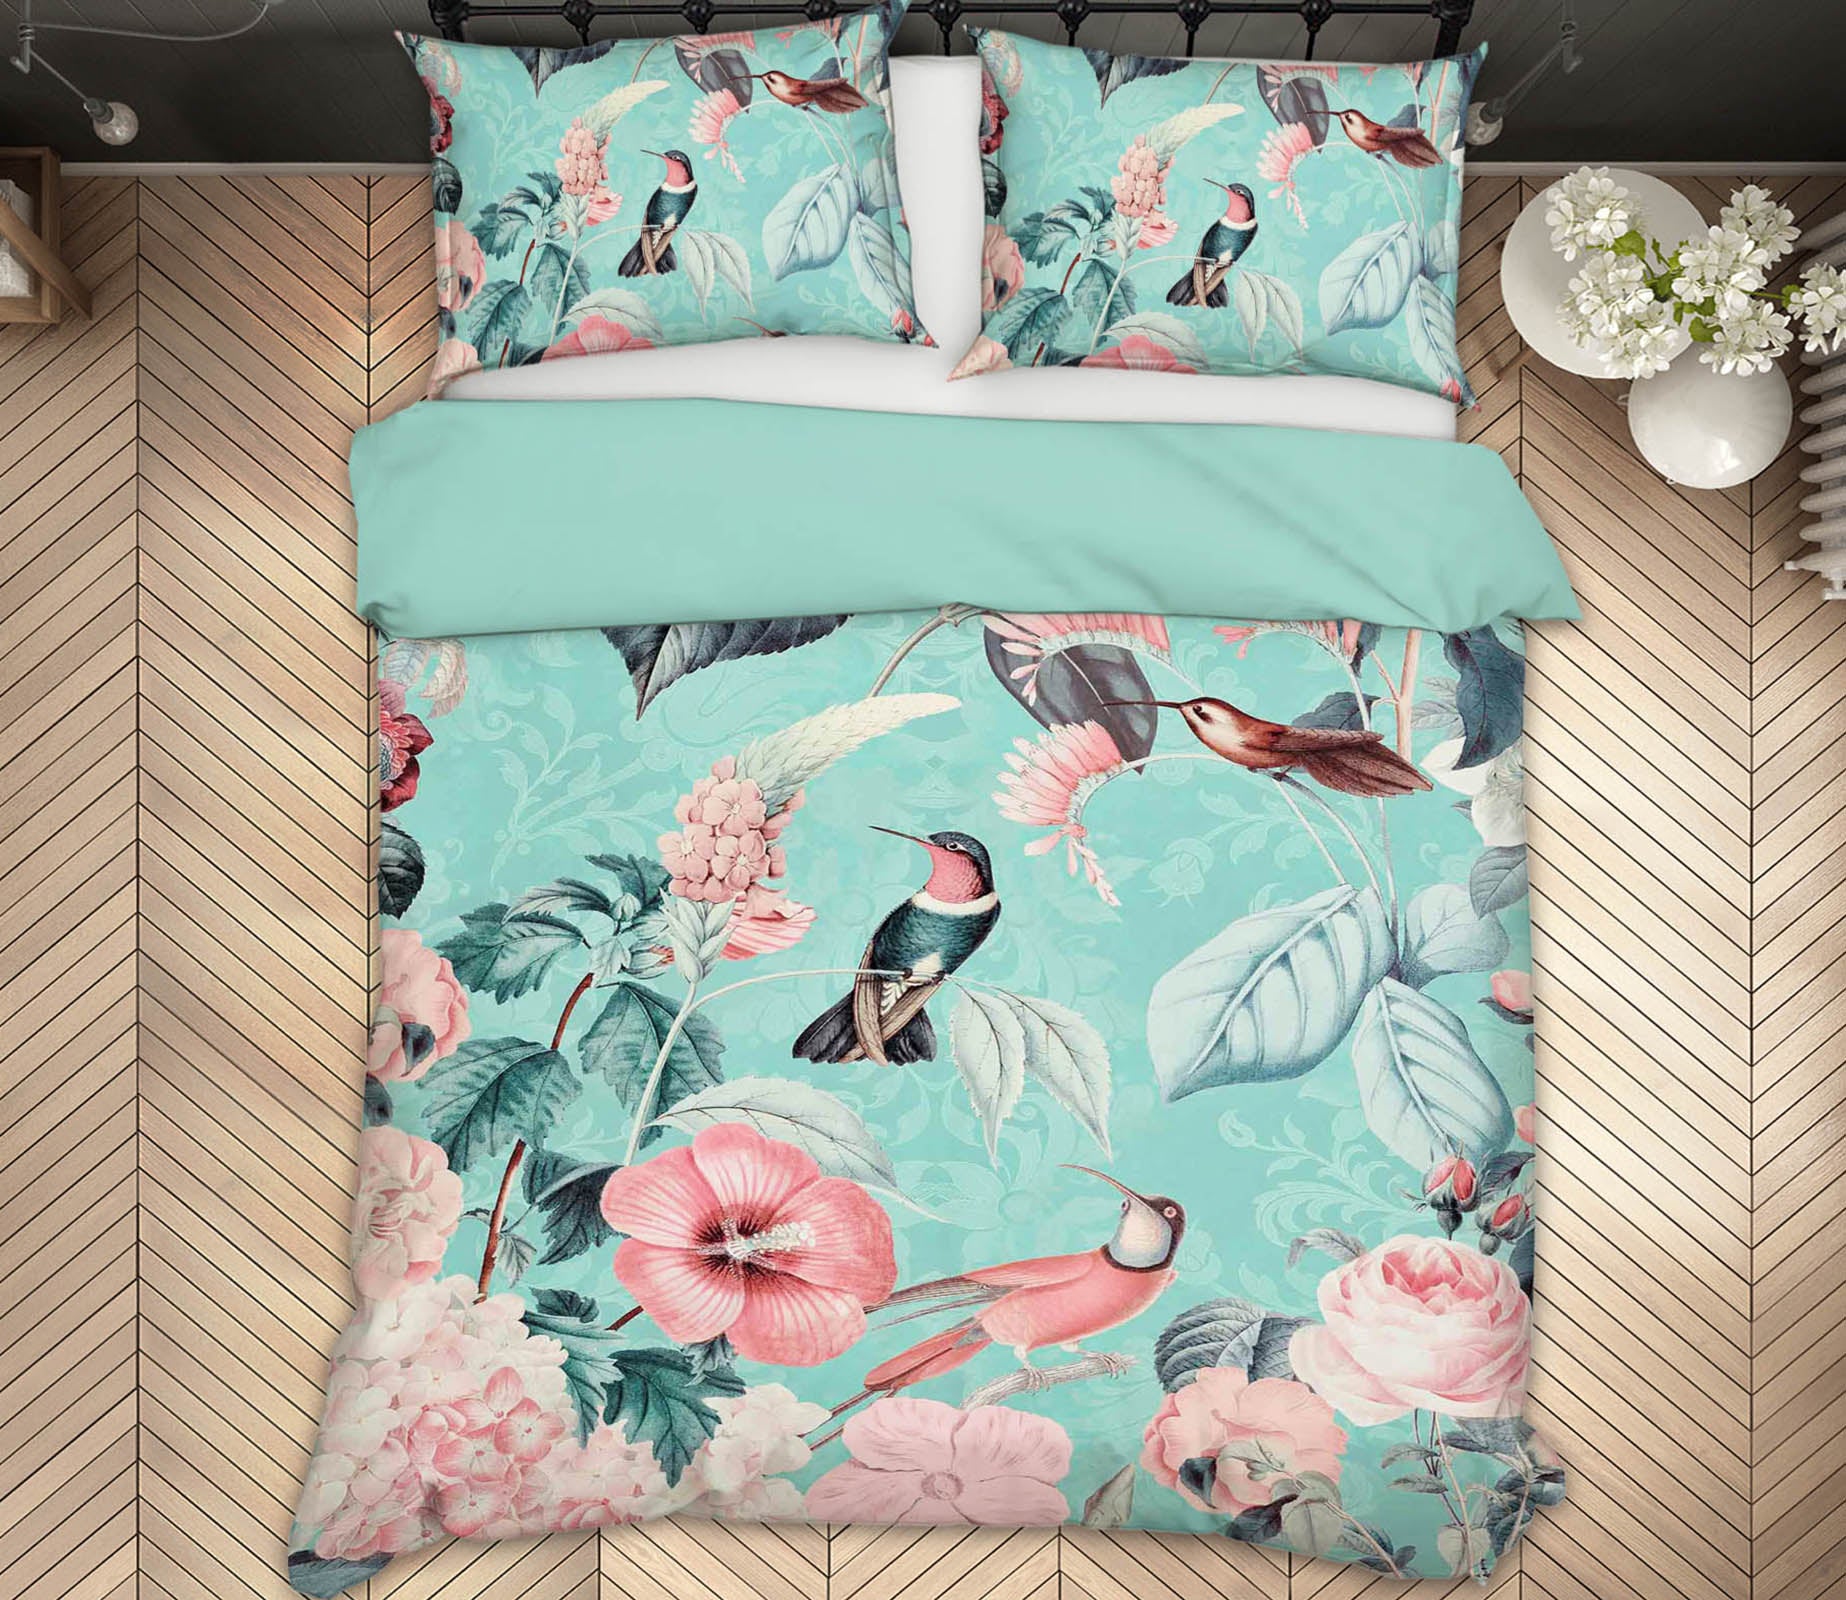 3D Cuddling 2124 Andrea haase Bedding Bed Pillowcases Quilt